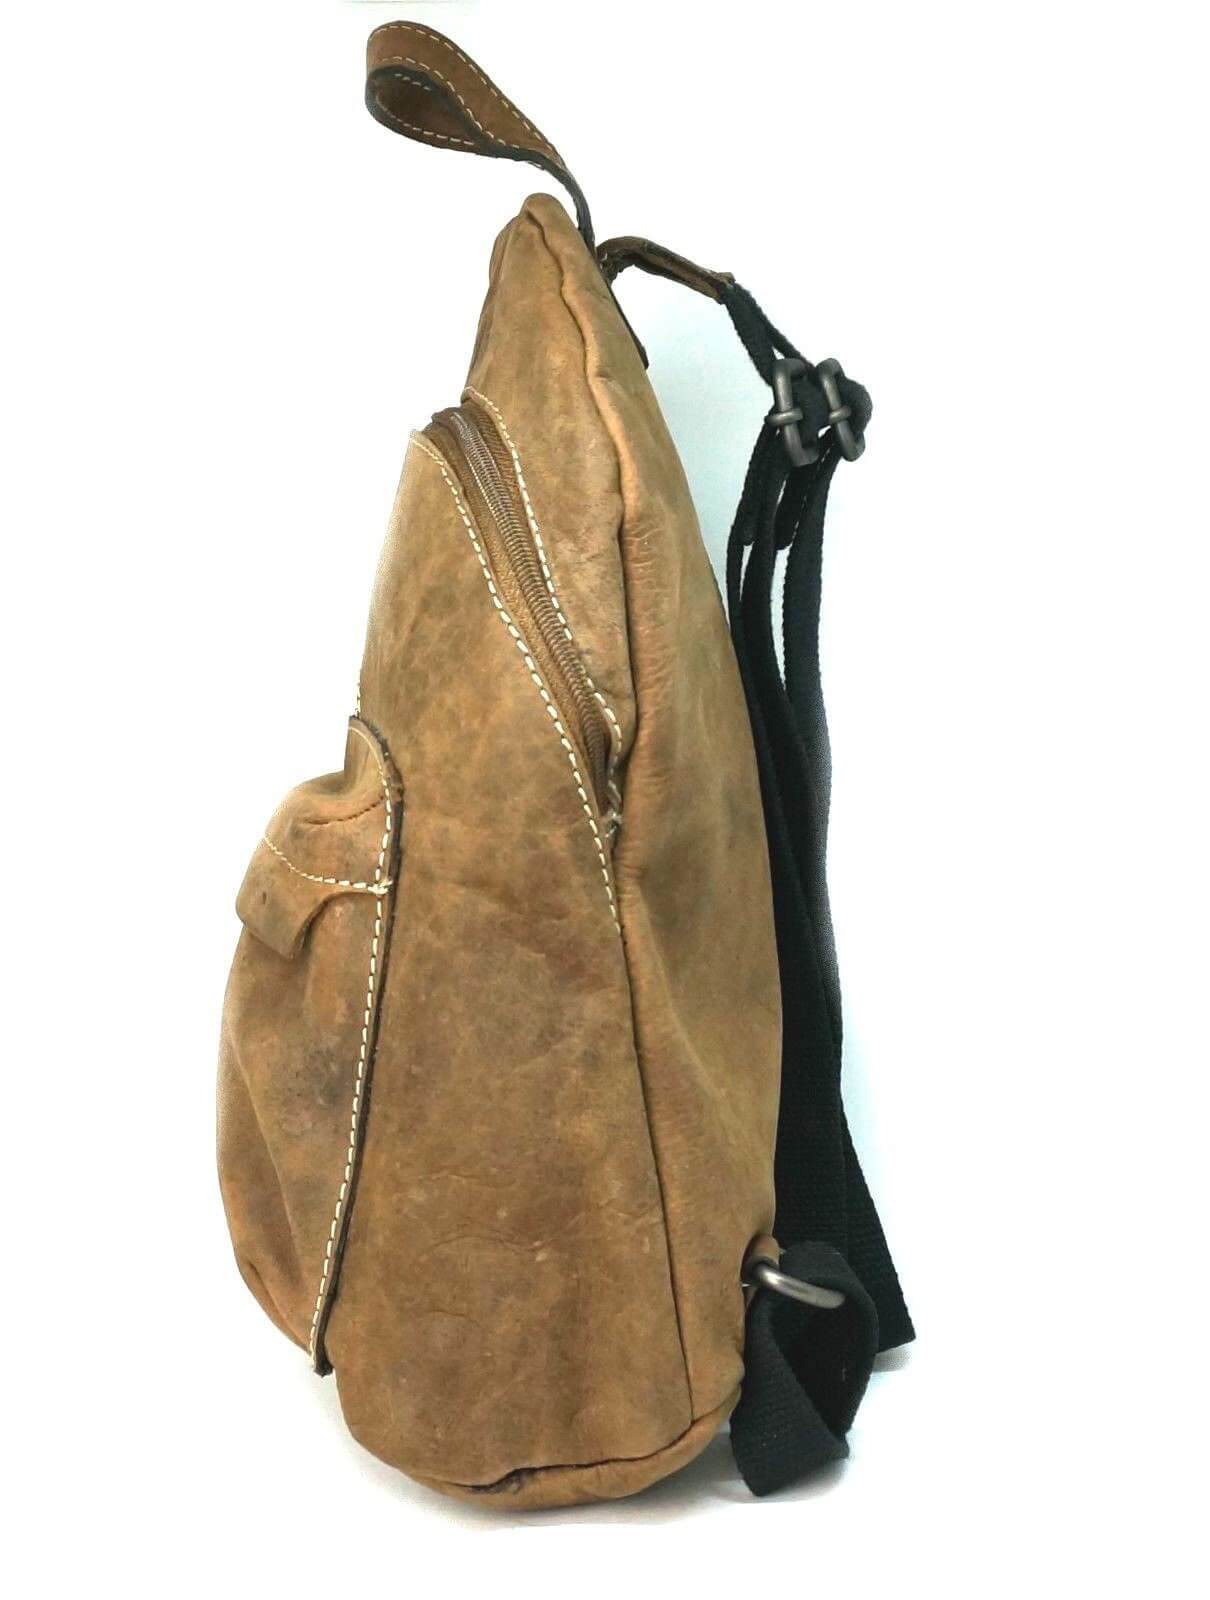 Personalised Ariel Brown Leather Backpack Unisex - KALGHI - KALGHI LEATHER